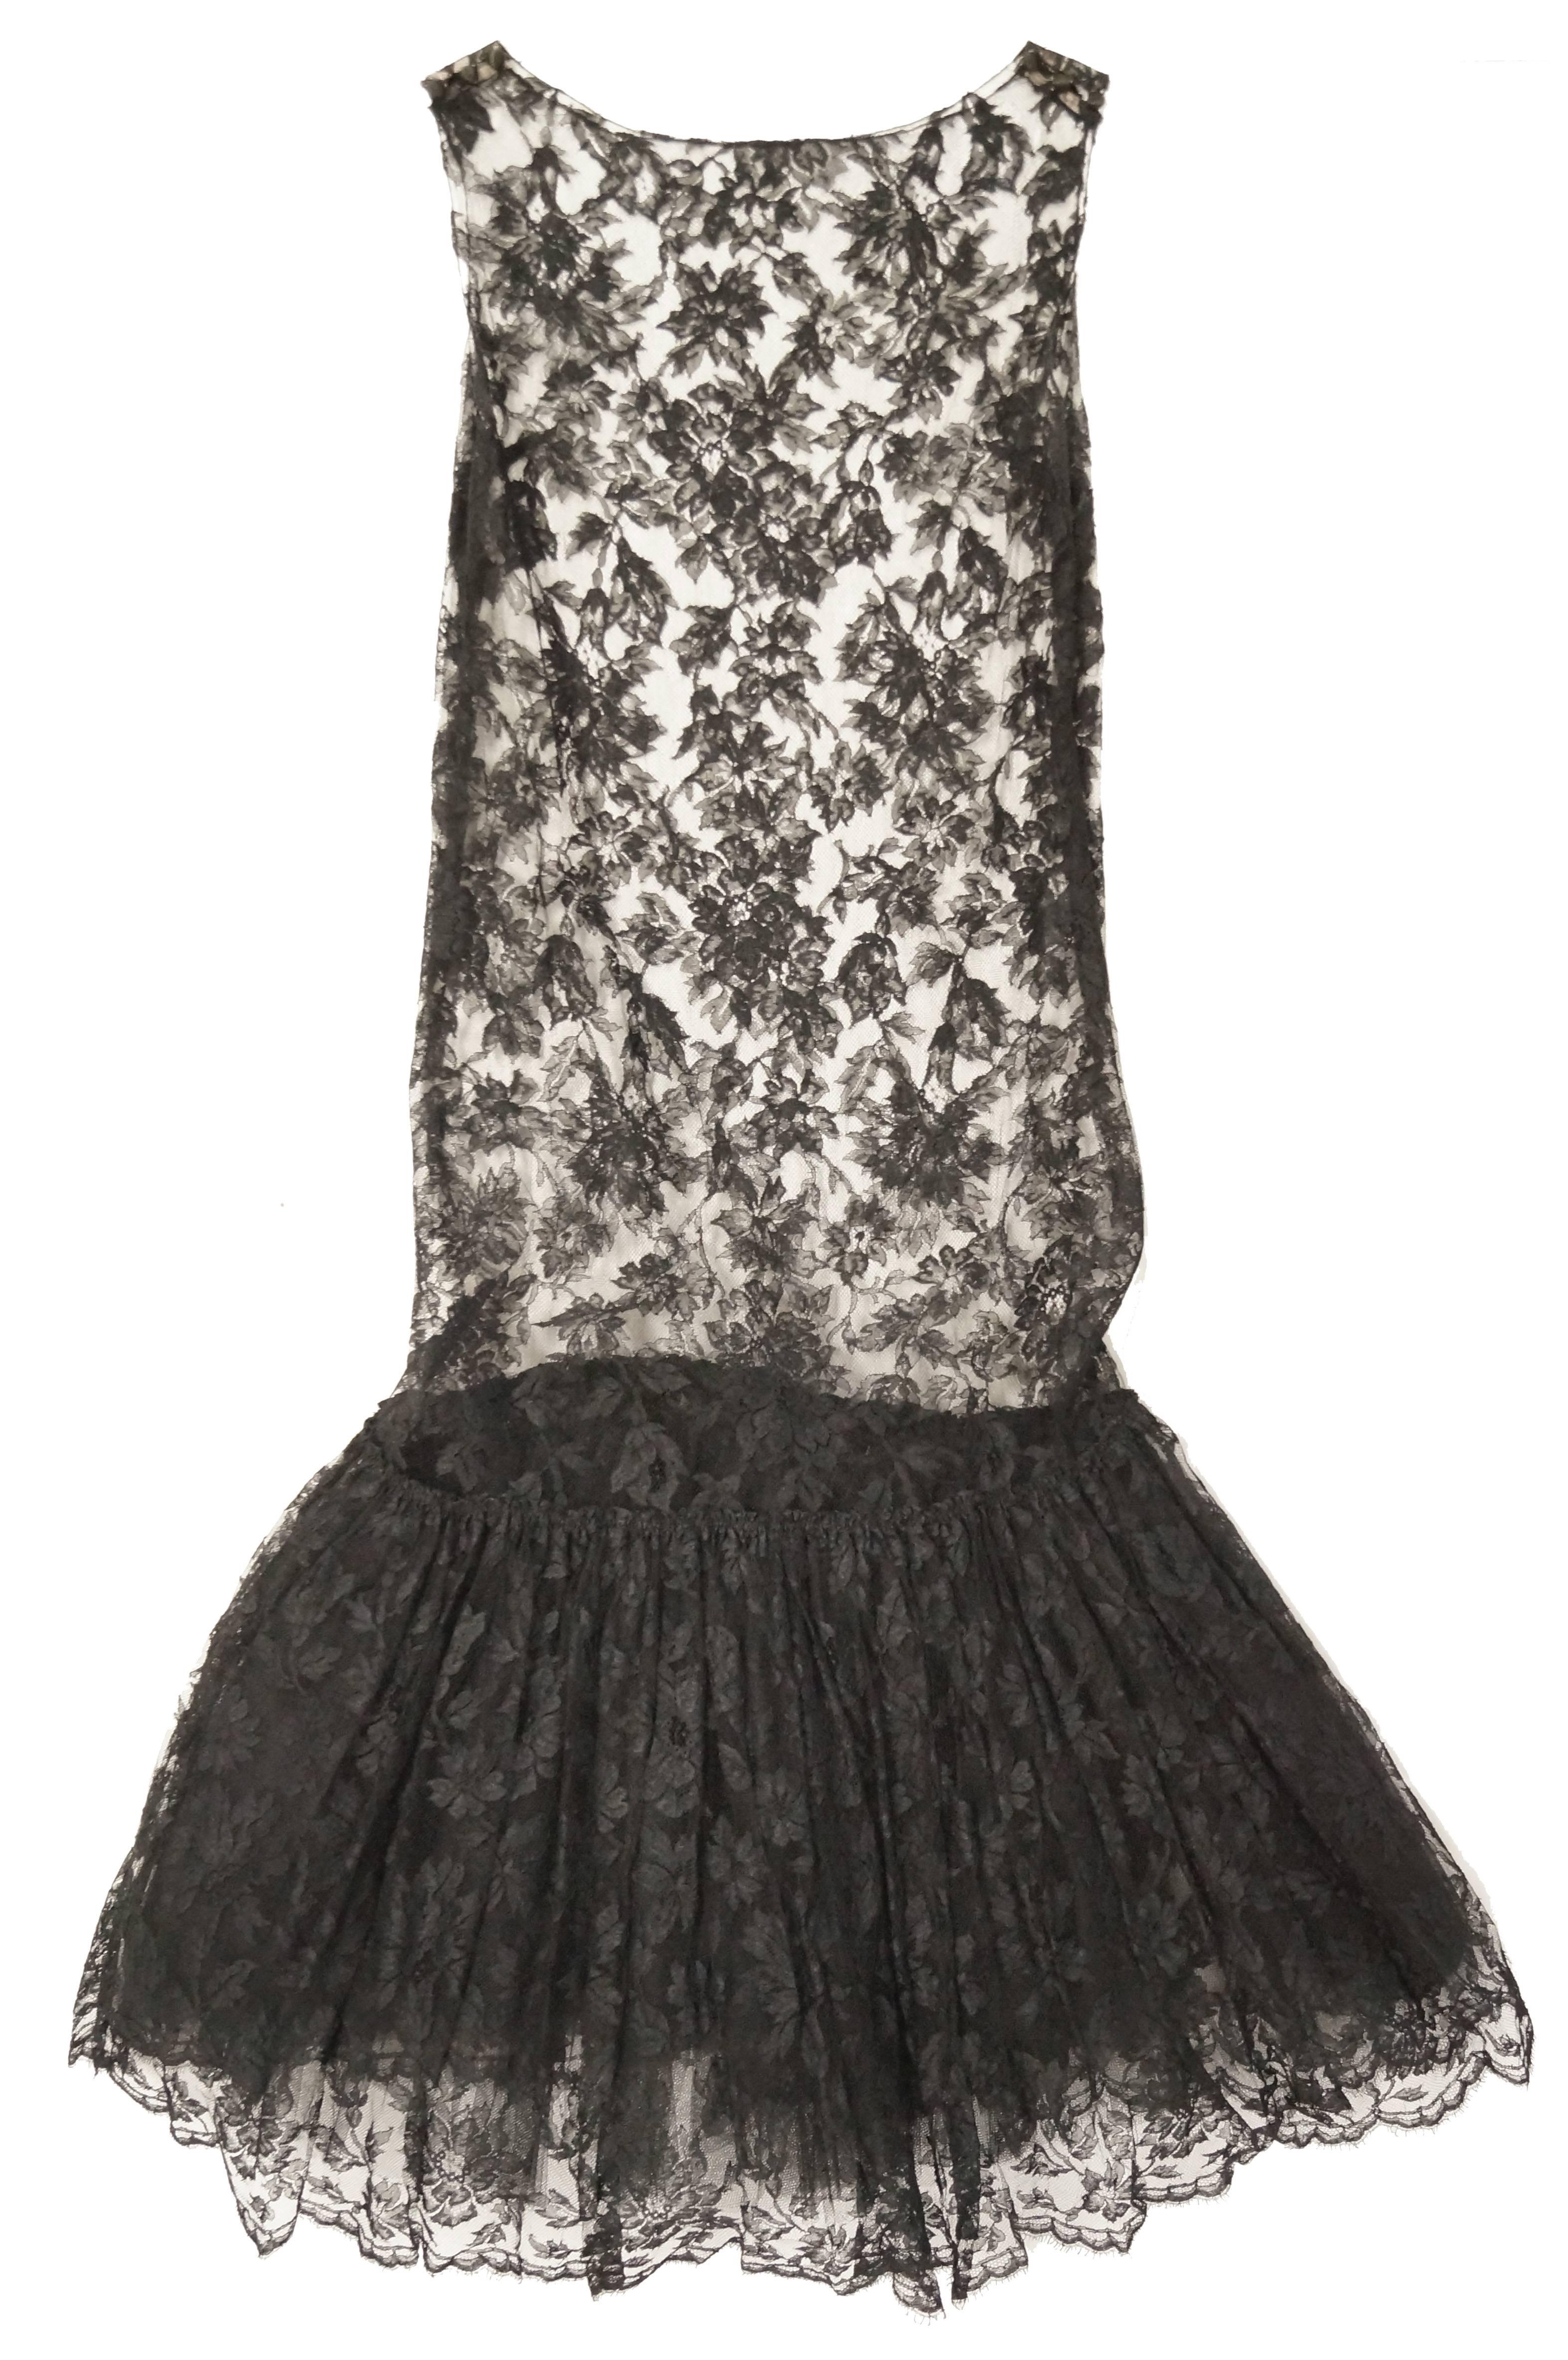 Sheer Black Lace Fluted Ruffle Dress, 1920s  For Sale 4